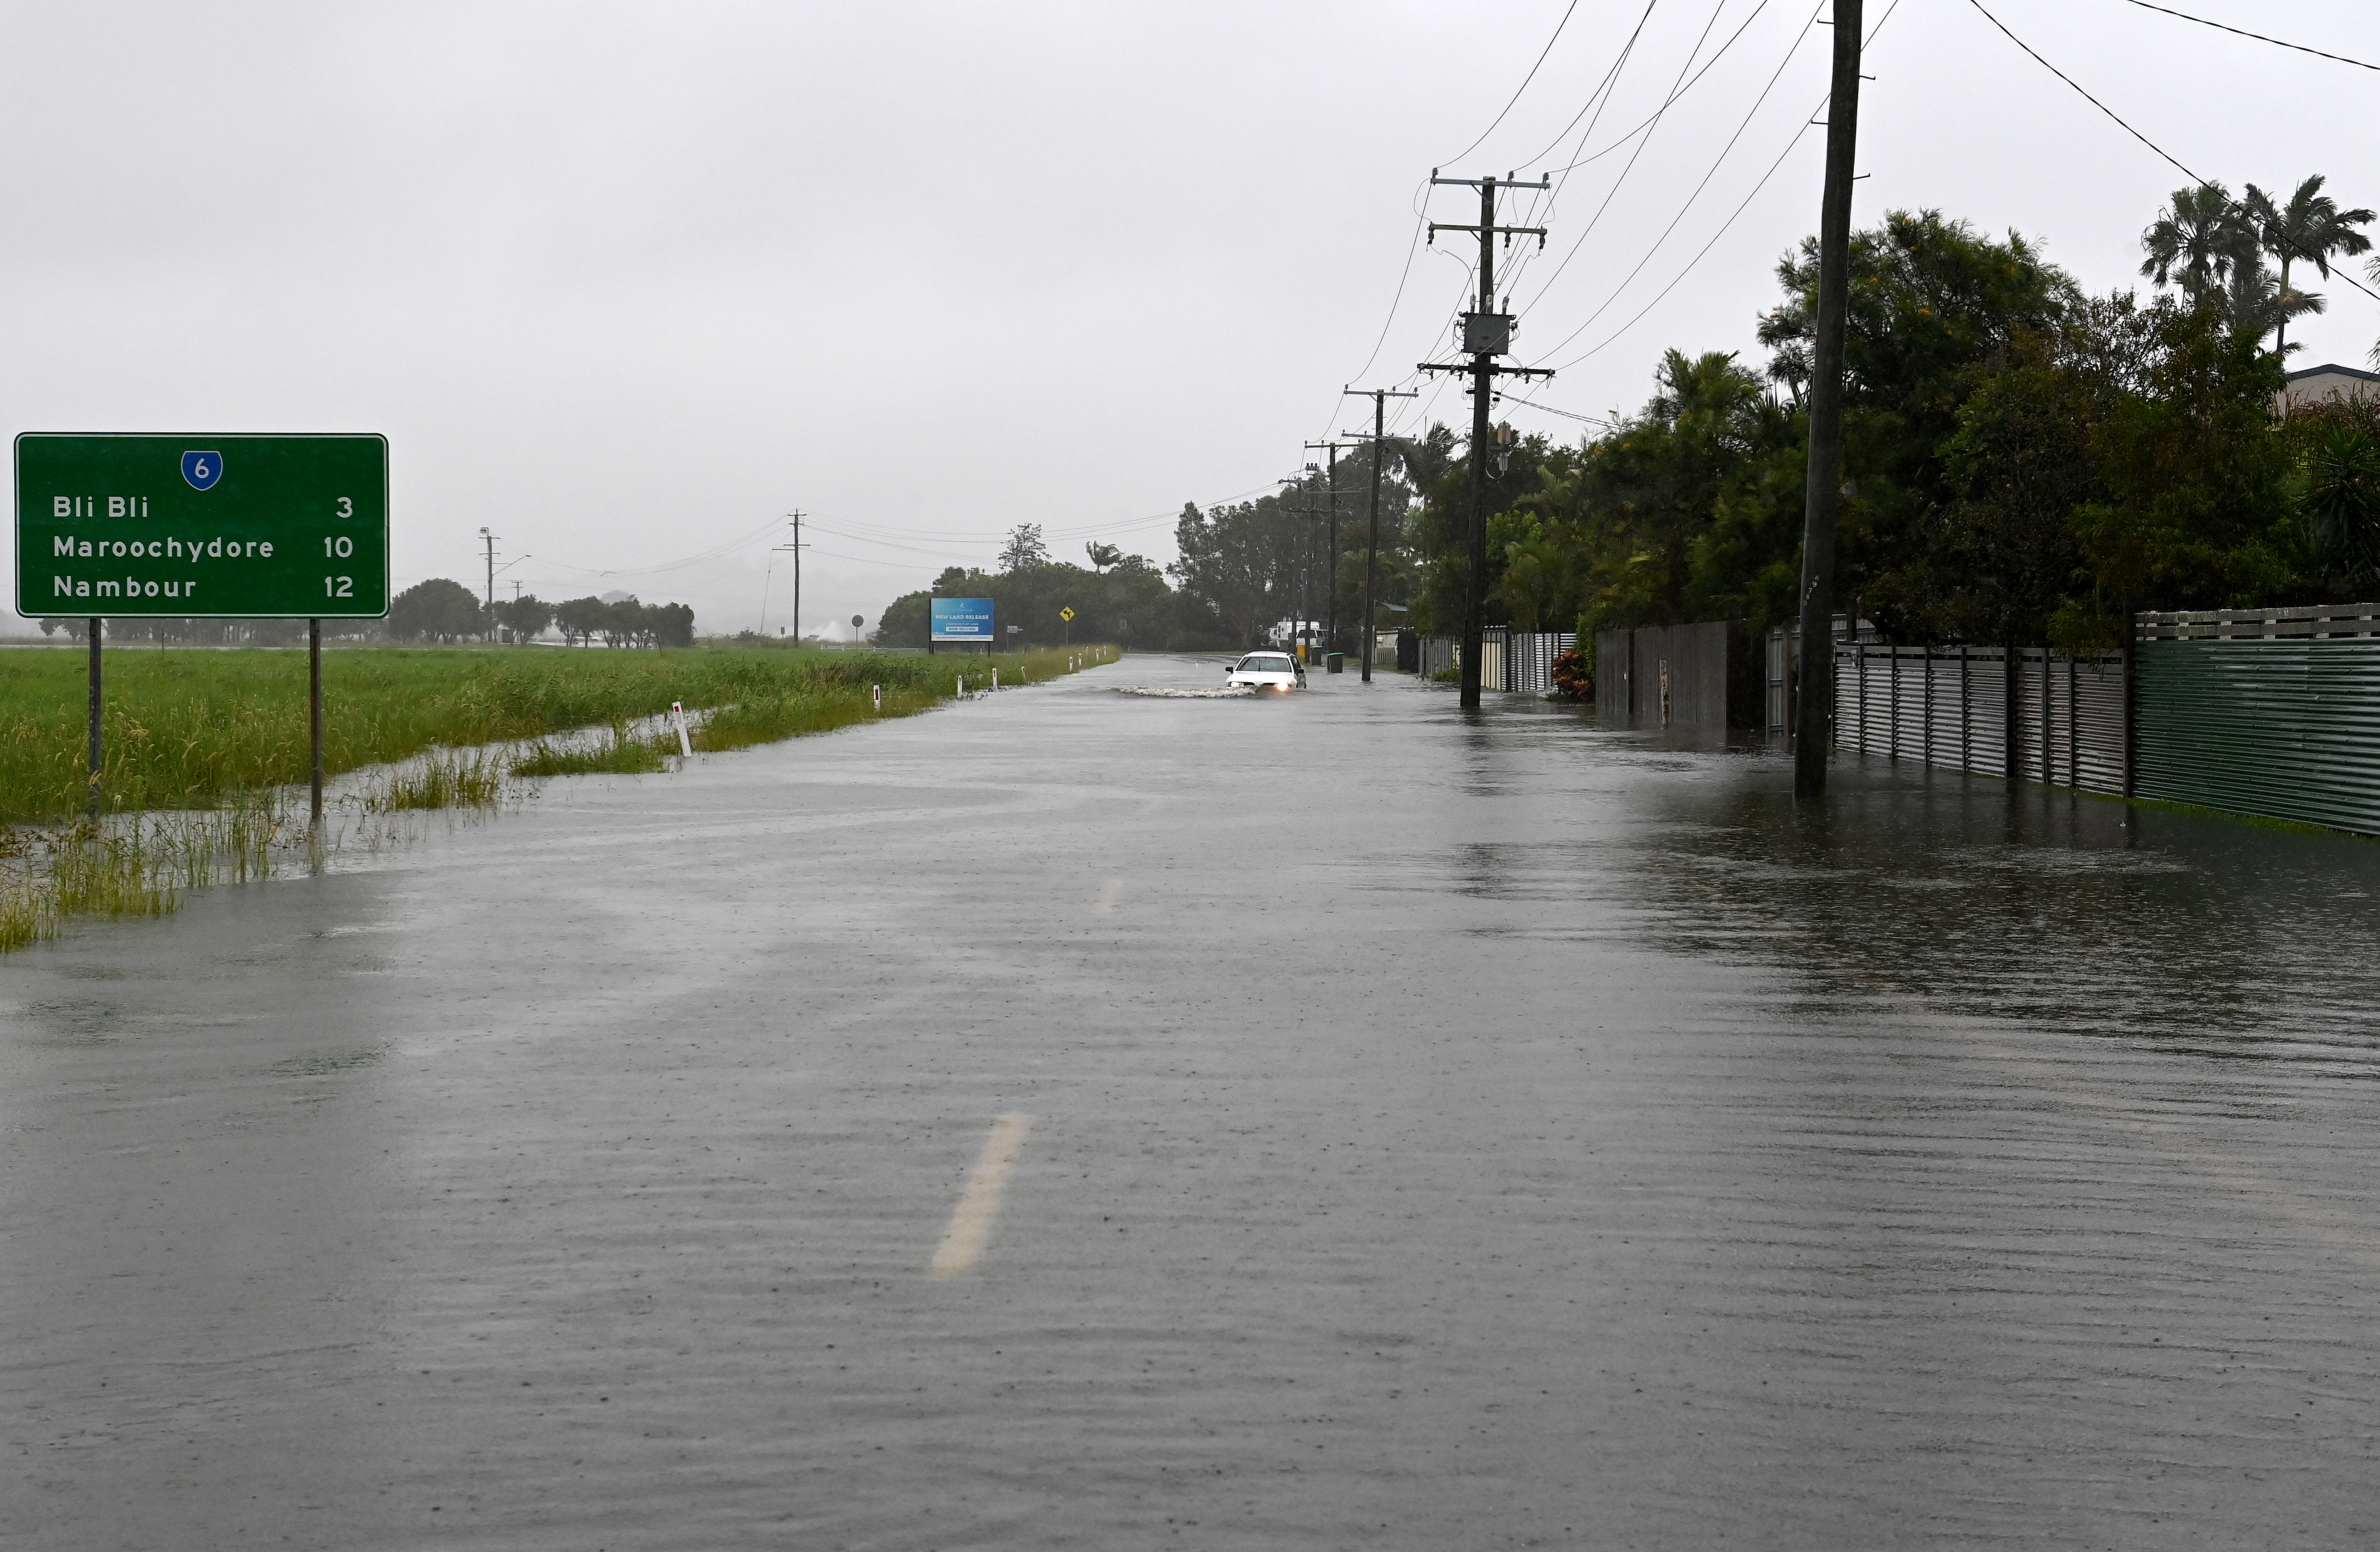 Roads near the Sunshine Coast town of Bli Bli in Queensland are flooded. 